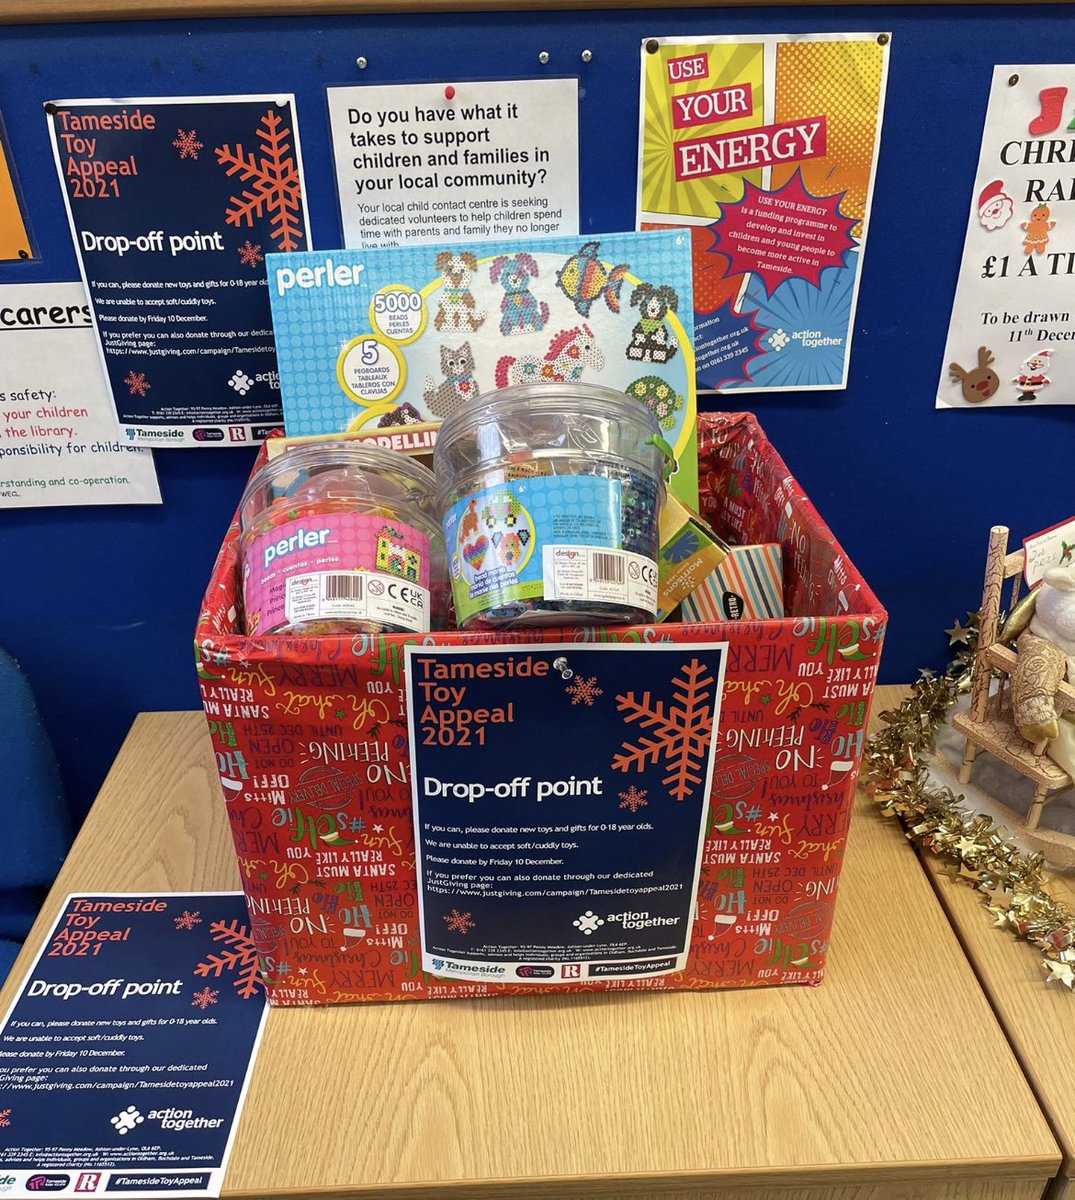 TAMESIDE TOY APPEAL 2021 🎅 

Thank you to everyone who has started to donate toys to this years #TamesideToyAppeal. 

If you’re able to donate place see full list of #Tameside drop off points by visiting the Action Together website: actiontogether.org.uk/tameside-toy-a…

#ProudTameside